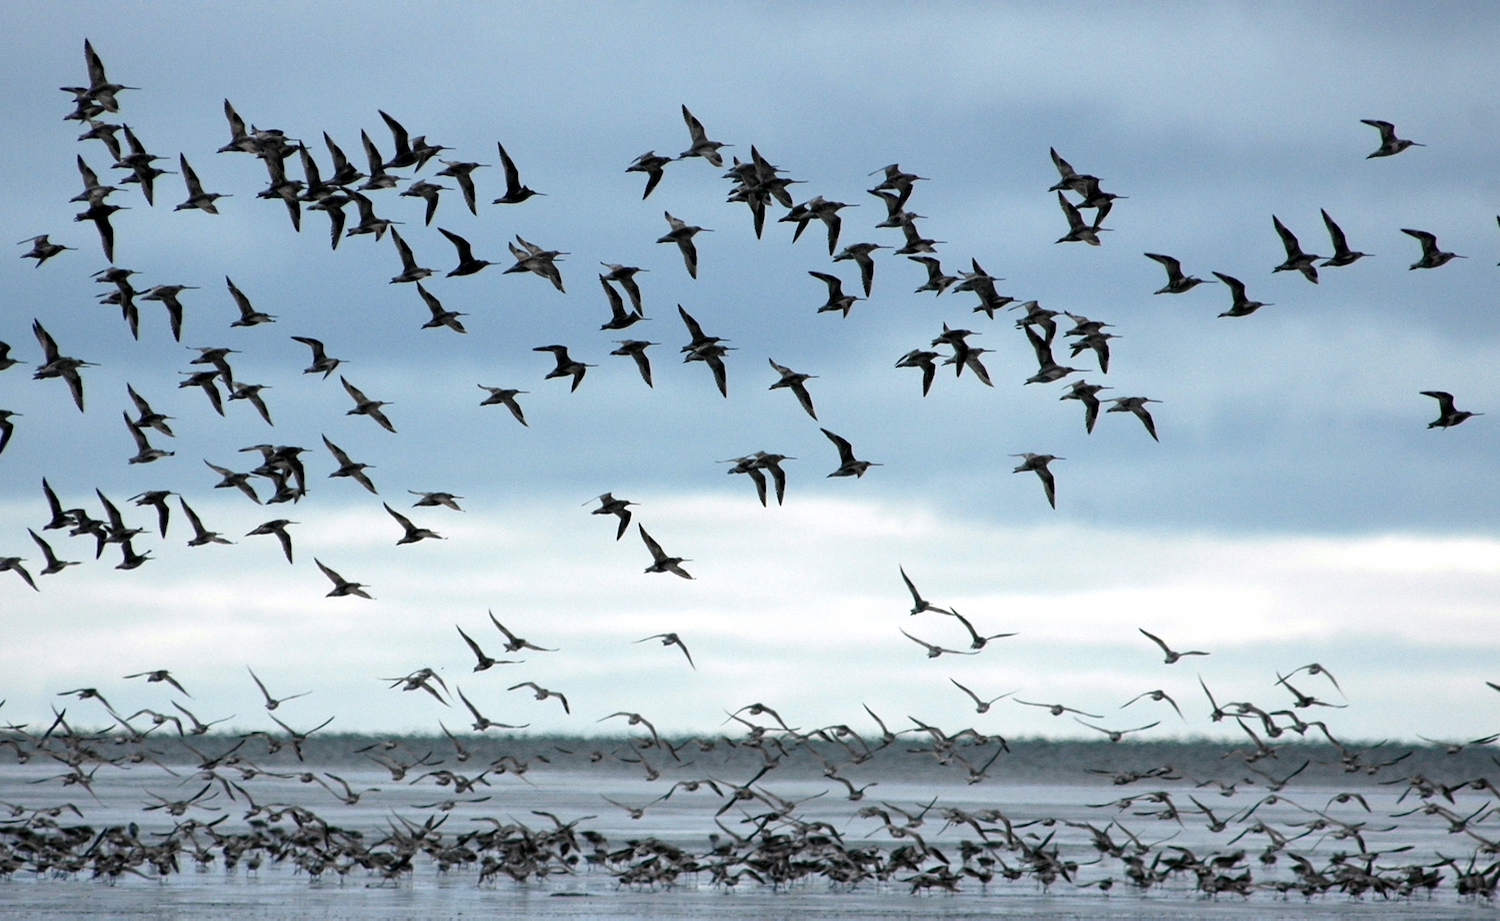 Dozens of birds fly above a mud flat, while others stand on the mud.